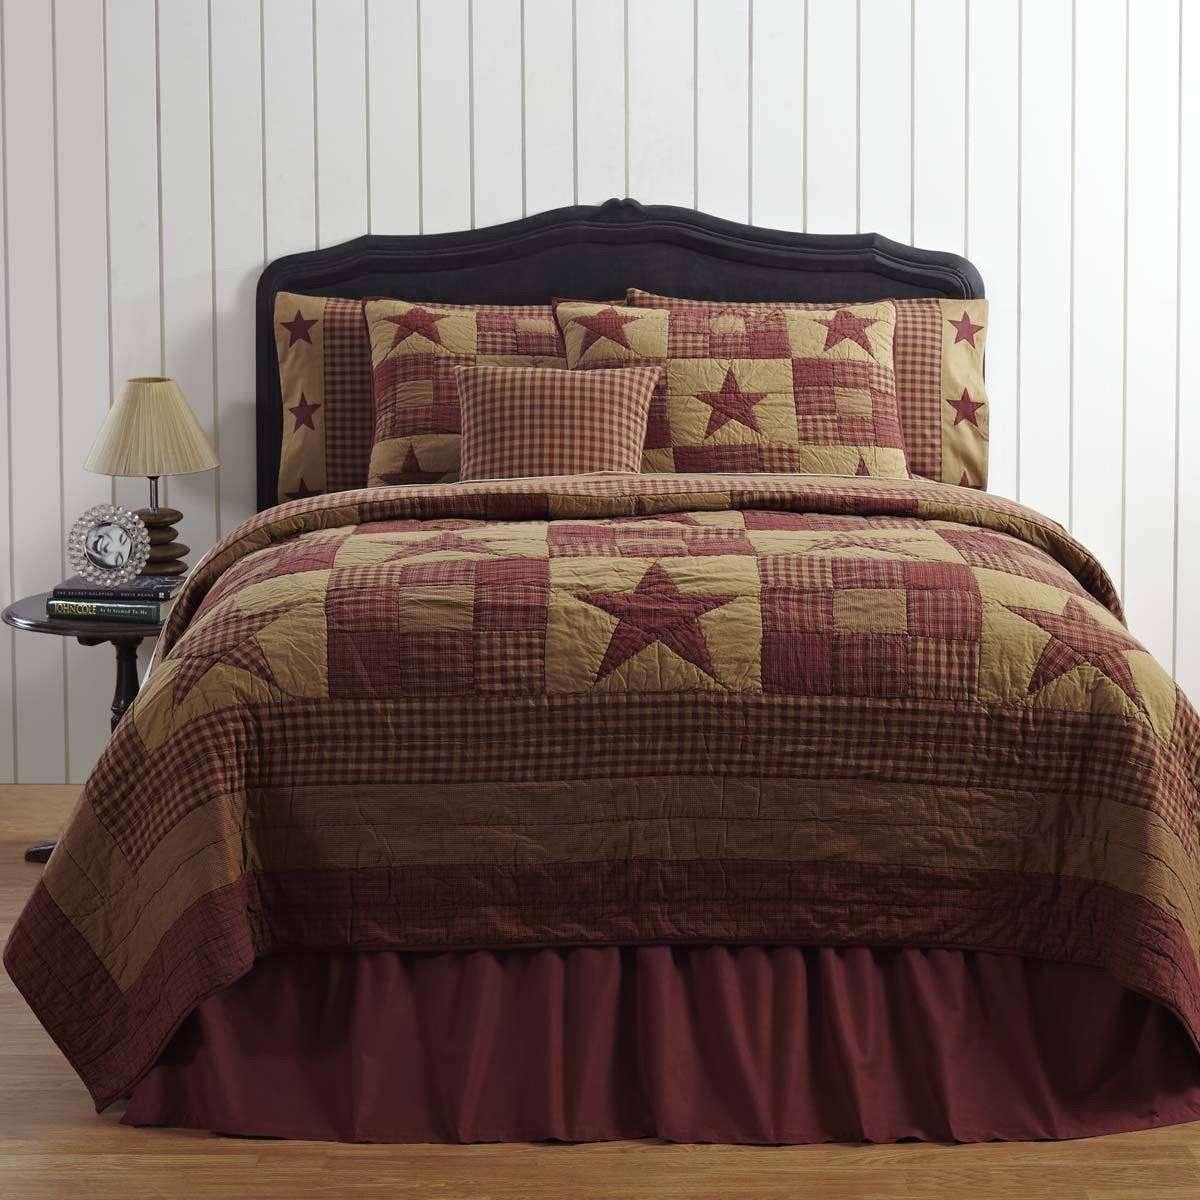 Ninepatch Star King Quilt 105Wx95L VHC Brands online